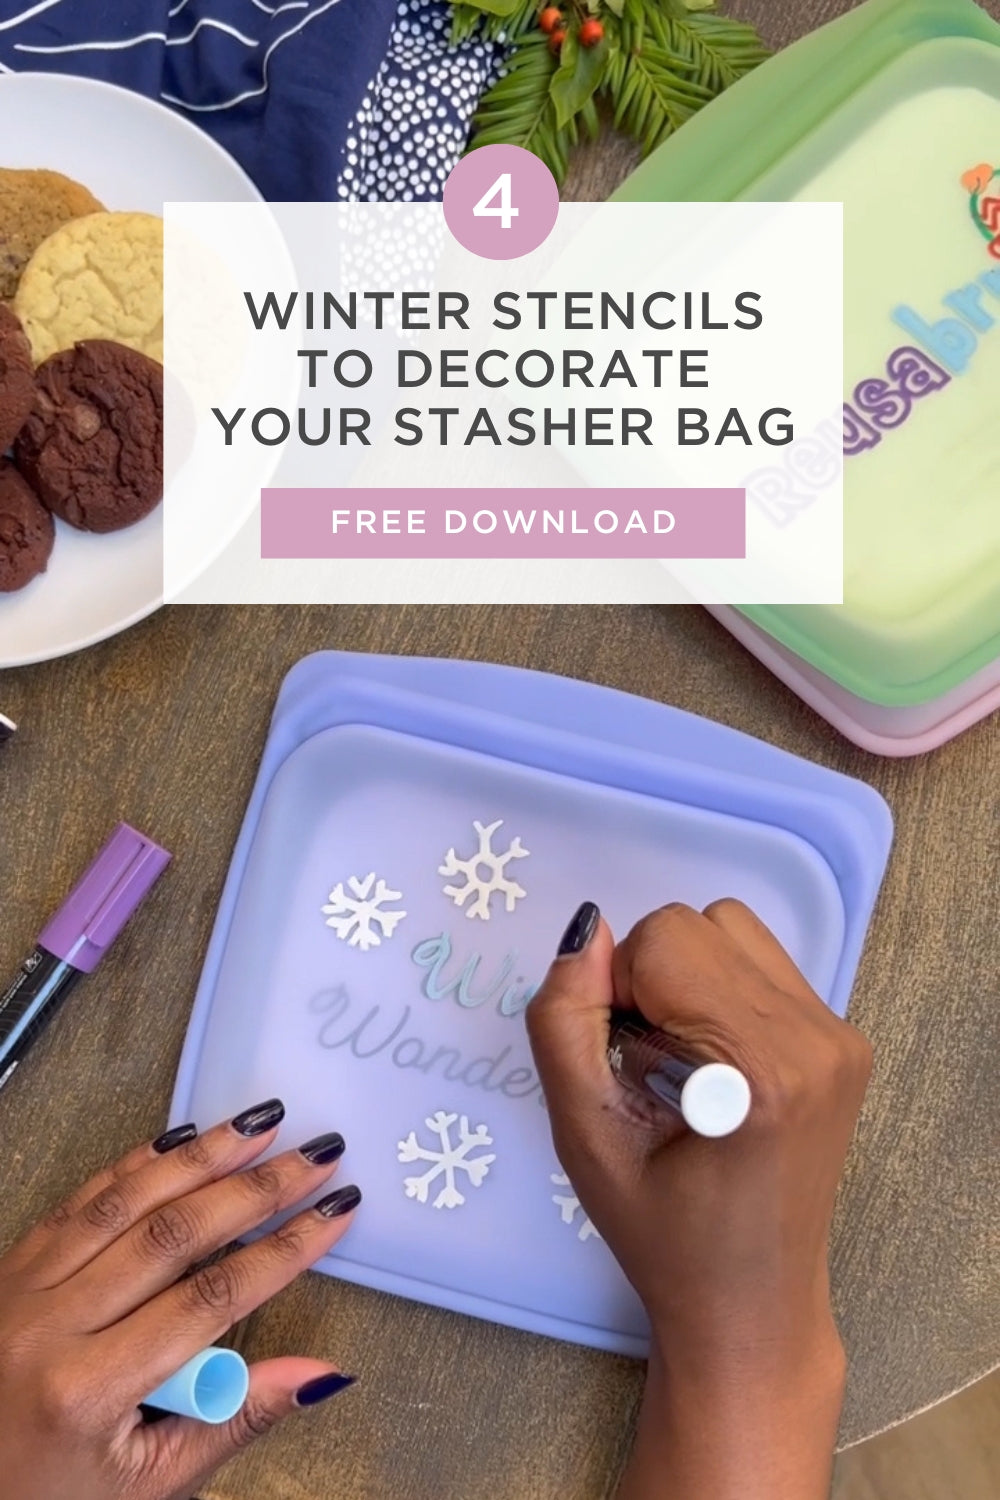 Winter Stencils to Decorate Stasher Bags